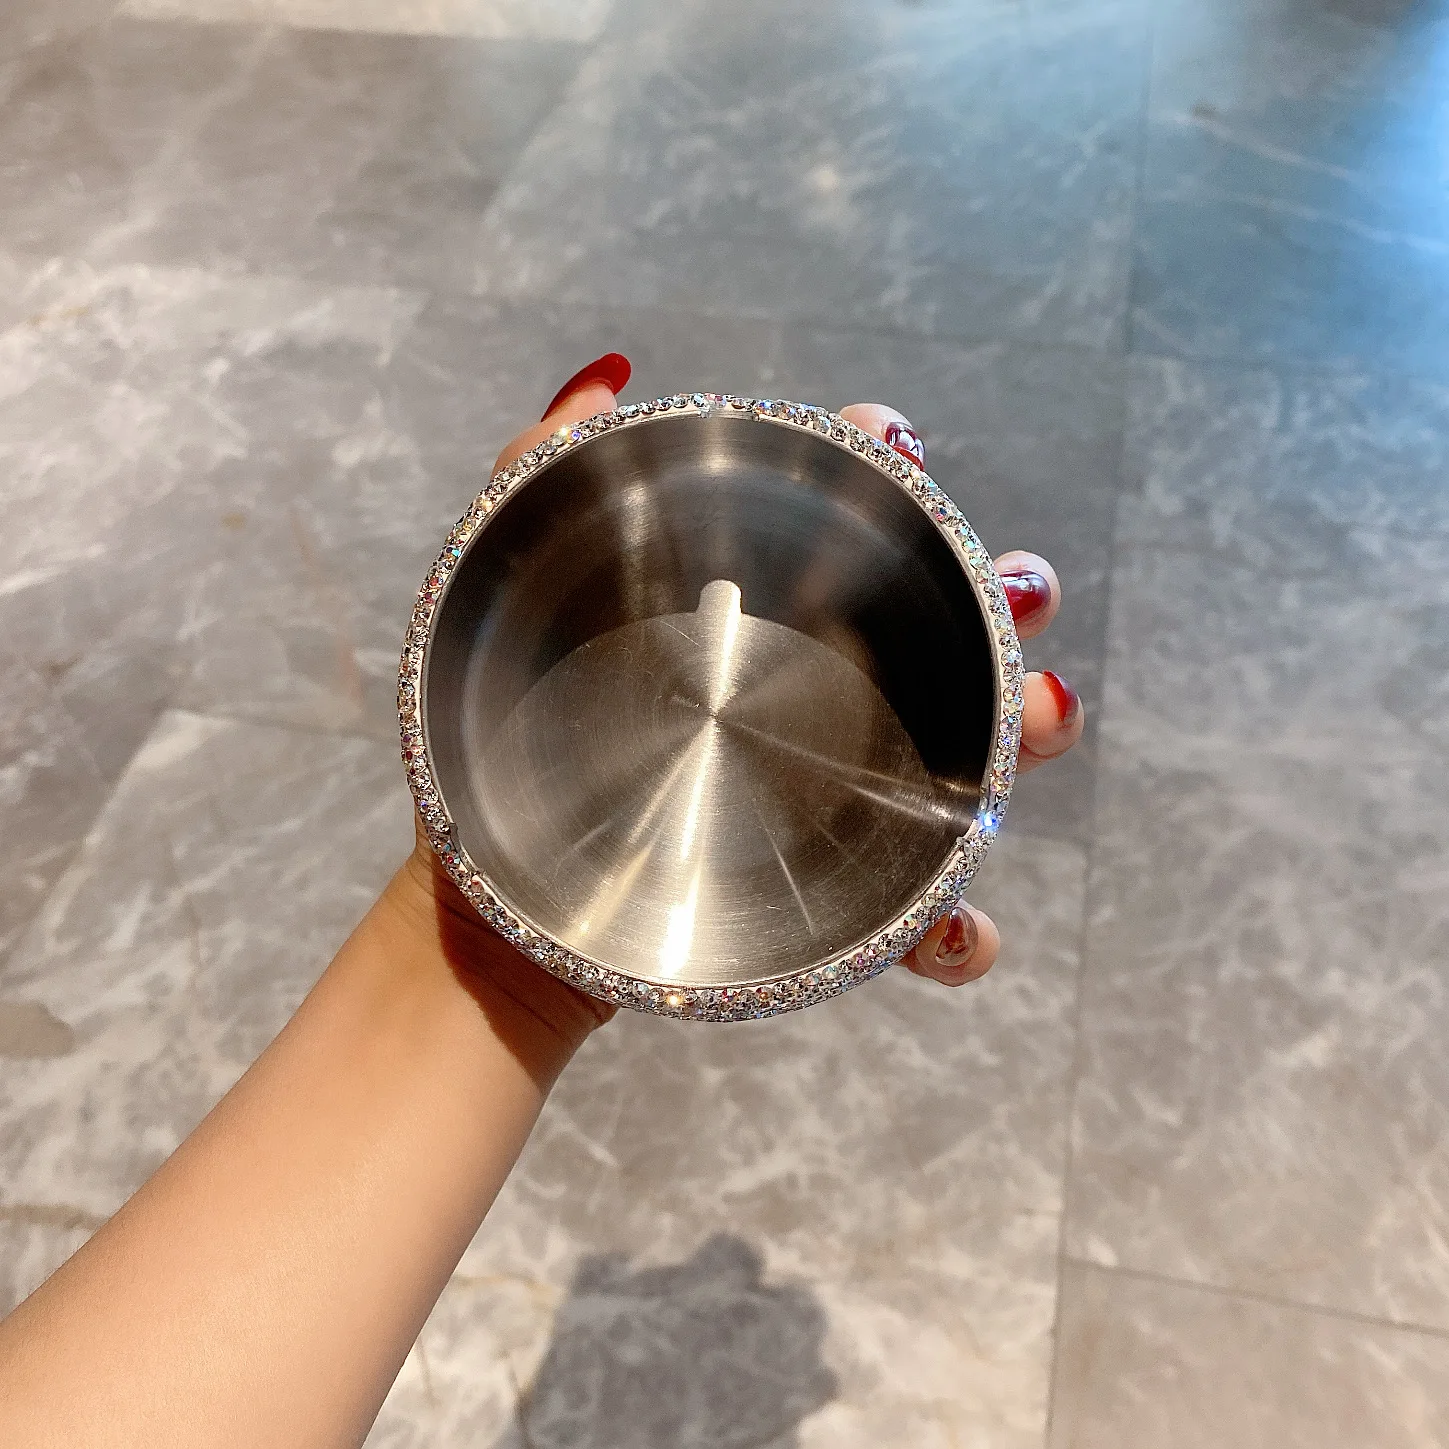 Ashtray For Girls With Crystals Stainless Steel Windproof Ash Tray Home Desktop Ash Holder Smoking Accessories Home Decorations enlarge